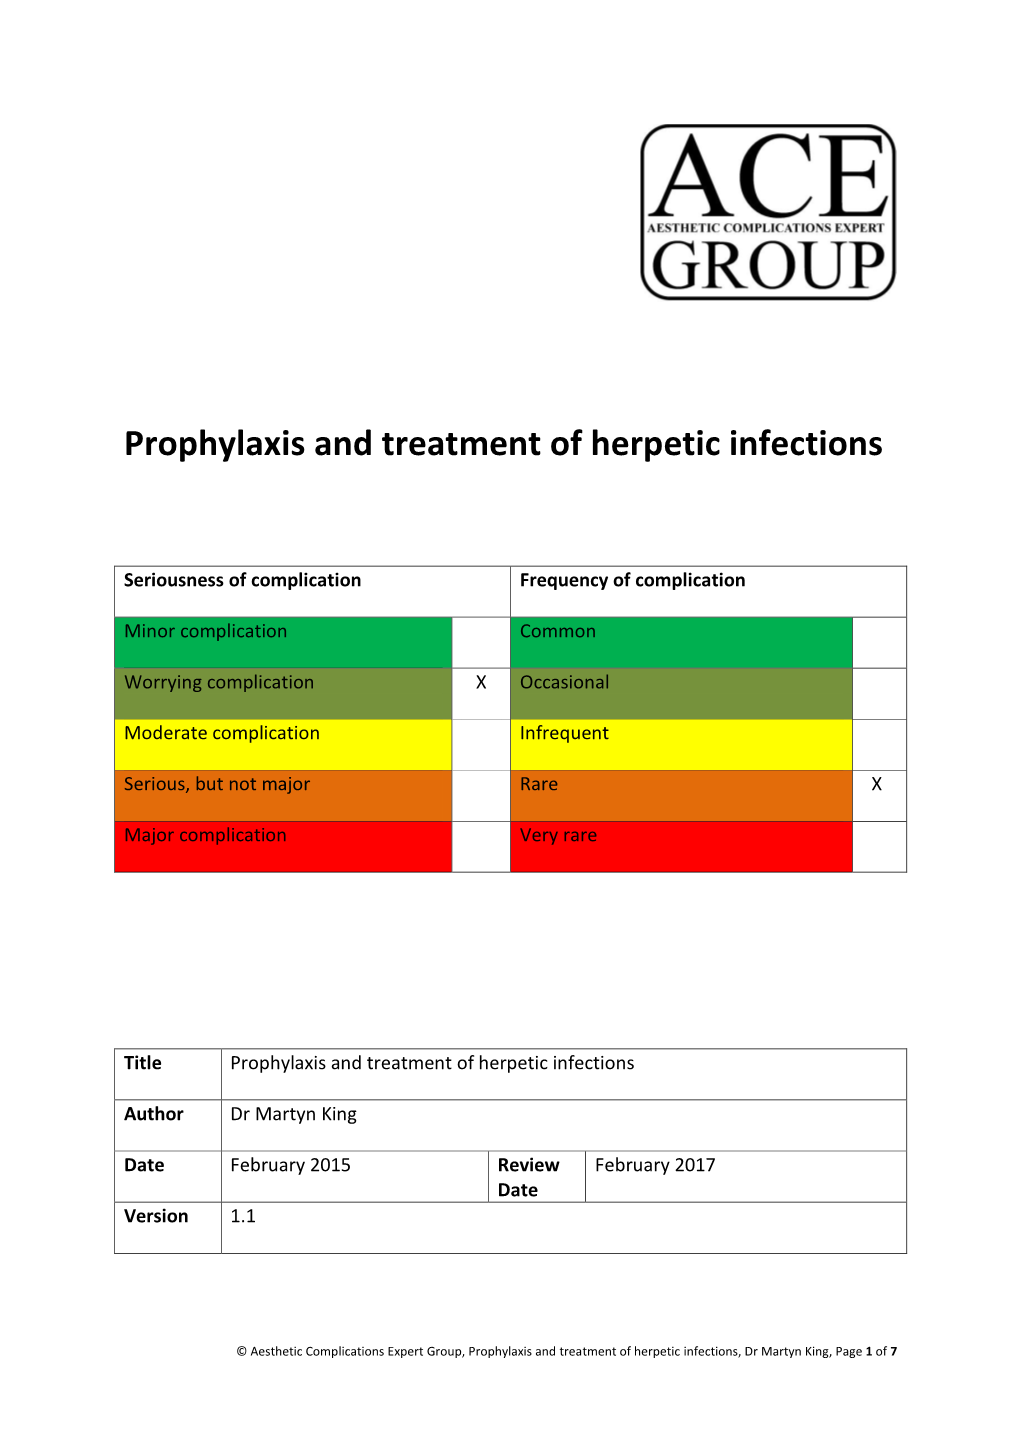 Prophylaxis and Treatment of Herpetic Infections